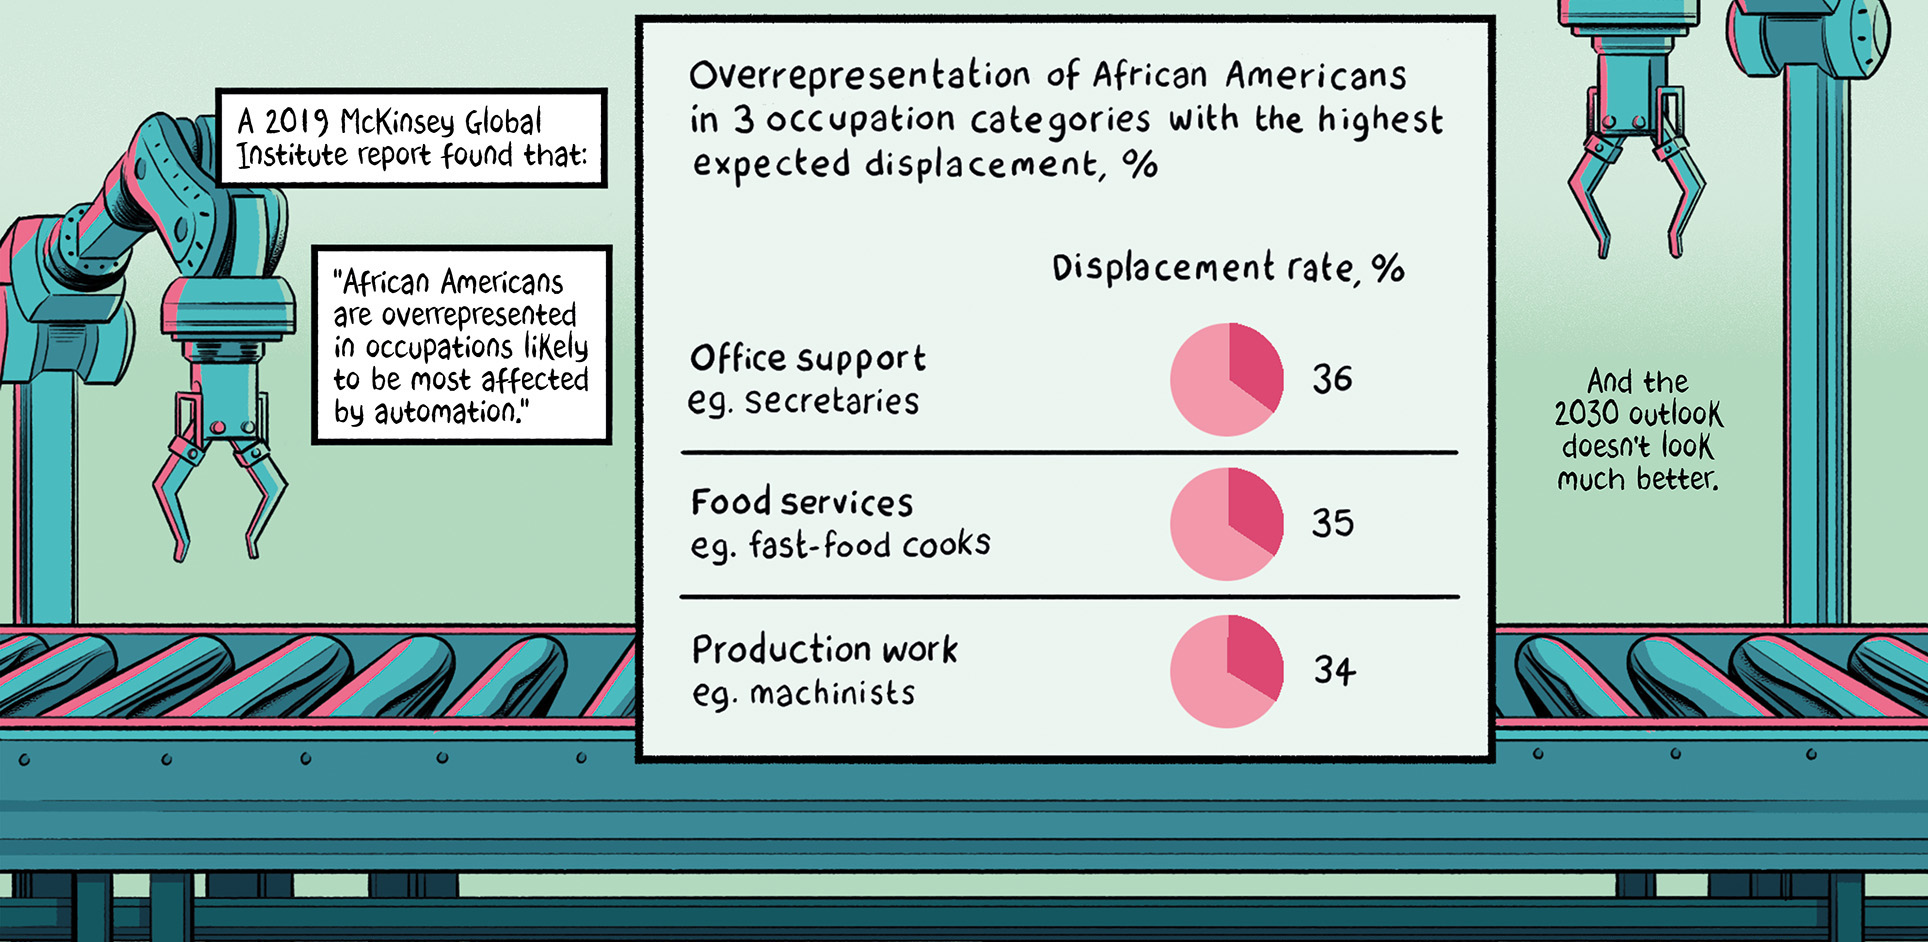 A conveyor belt with a chart, titled "Overrepresentation of African Americans in 3 occupation categories with the highest expected displacement, %" The statistics are Office Support e.g. secretaries with a displacement rate of 36%, Food Services, e.g. fast-food cooks with a displacement rate of 35% and Production work e.g. machinists with a displacement rate of 34%. The text reads, "A 2019 McKinsey Global Intitute report found that: 'African Americans are overrepresented in occupations likely to be the most affected by automation.' And the 2030 outlook doesn't look much better."